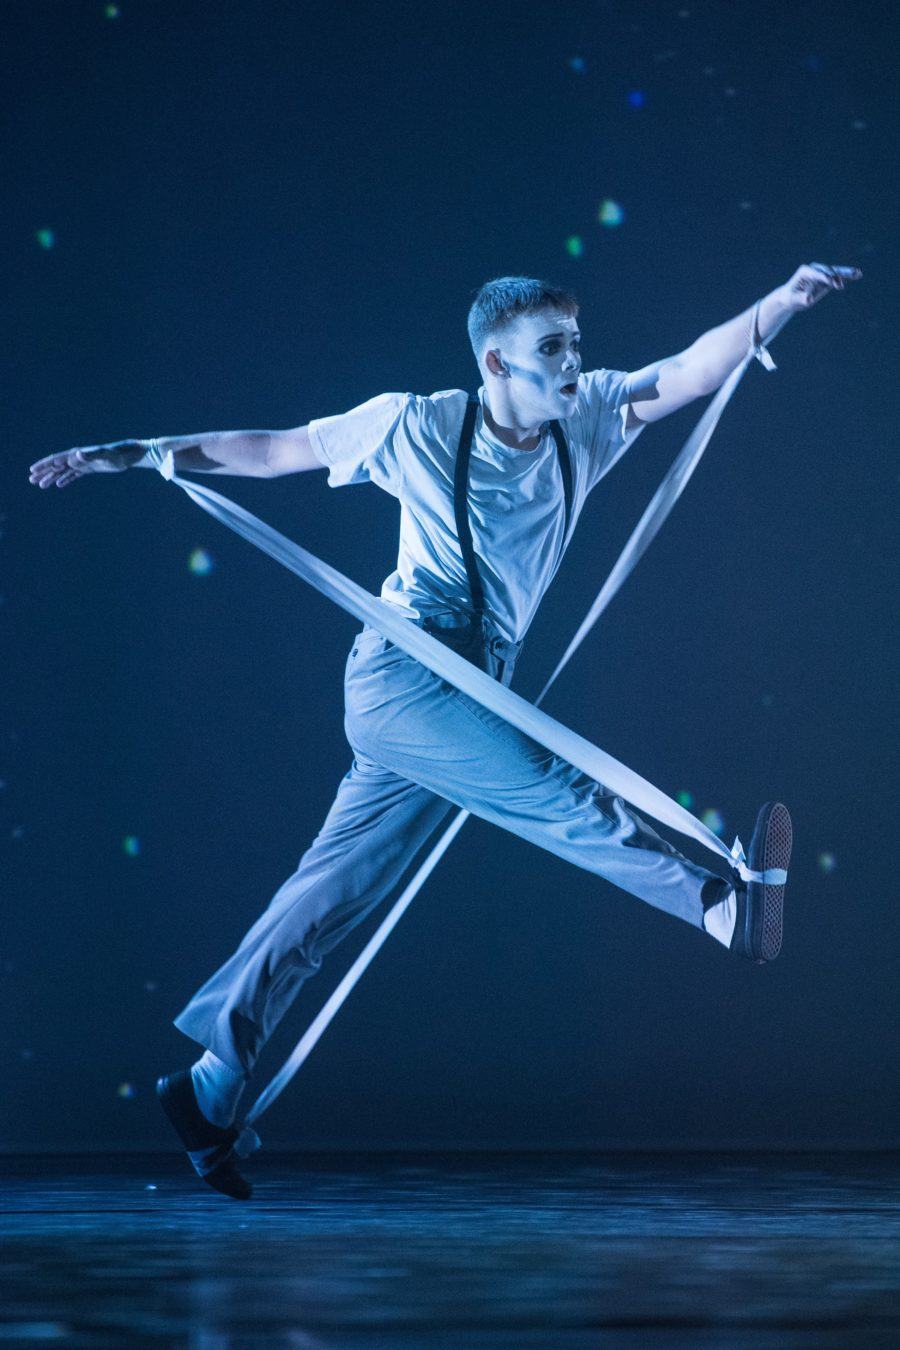 Max Revell performs in the Grand Final of BBC Young Dancer 2019